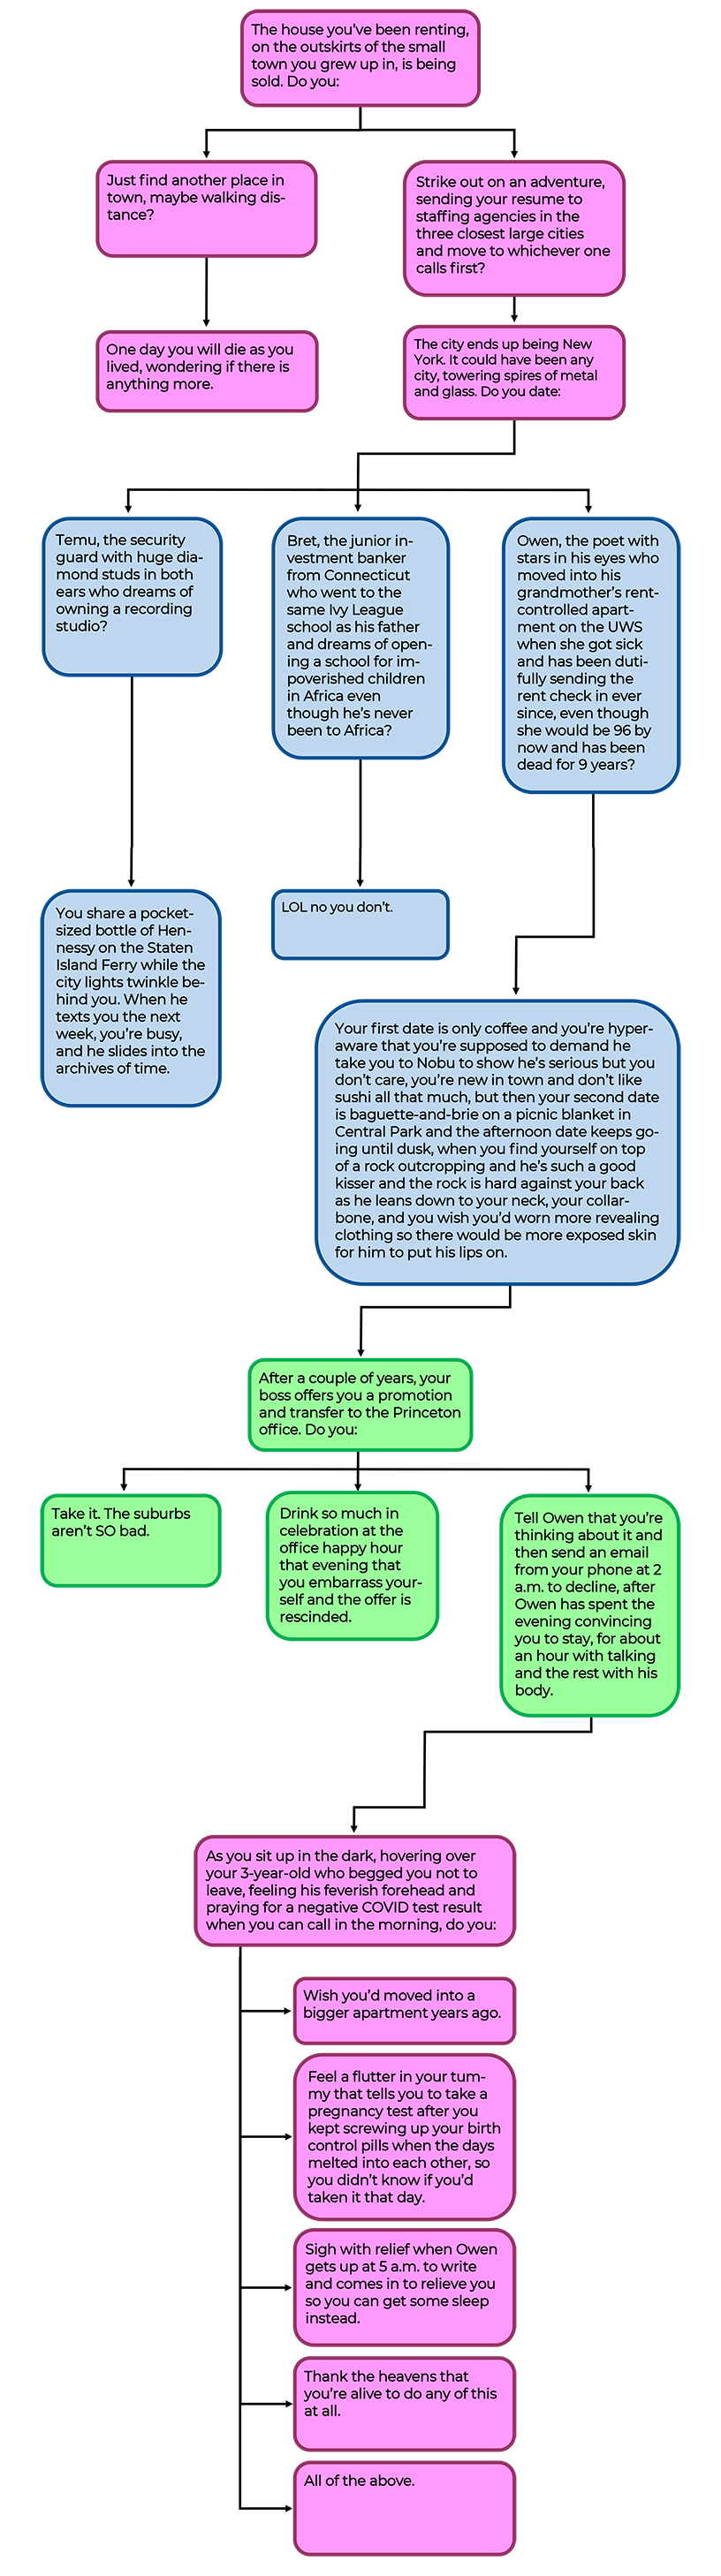 Four-tiered flowchart - full text follows after image.